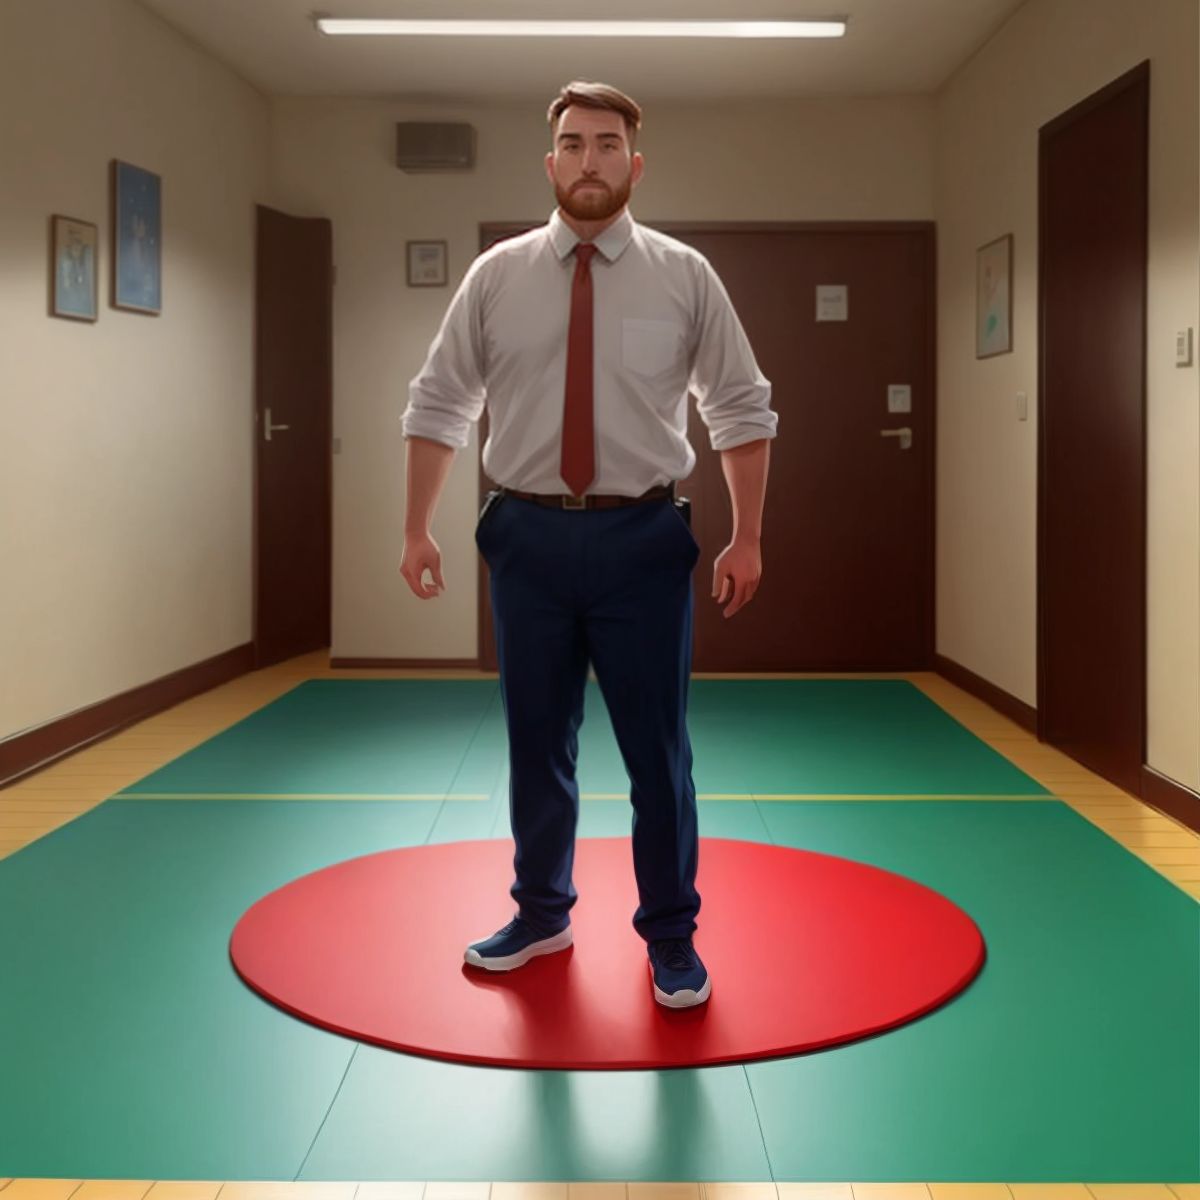 A man standing up from a mat, looking surprised